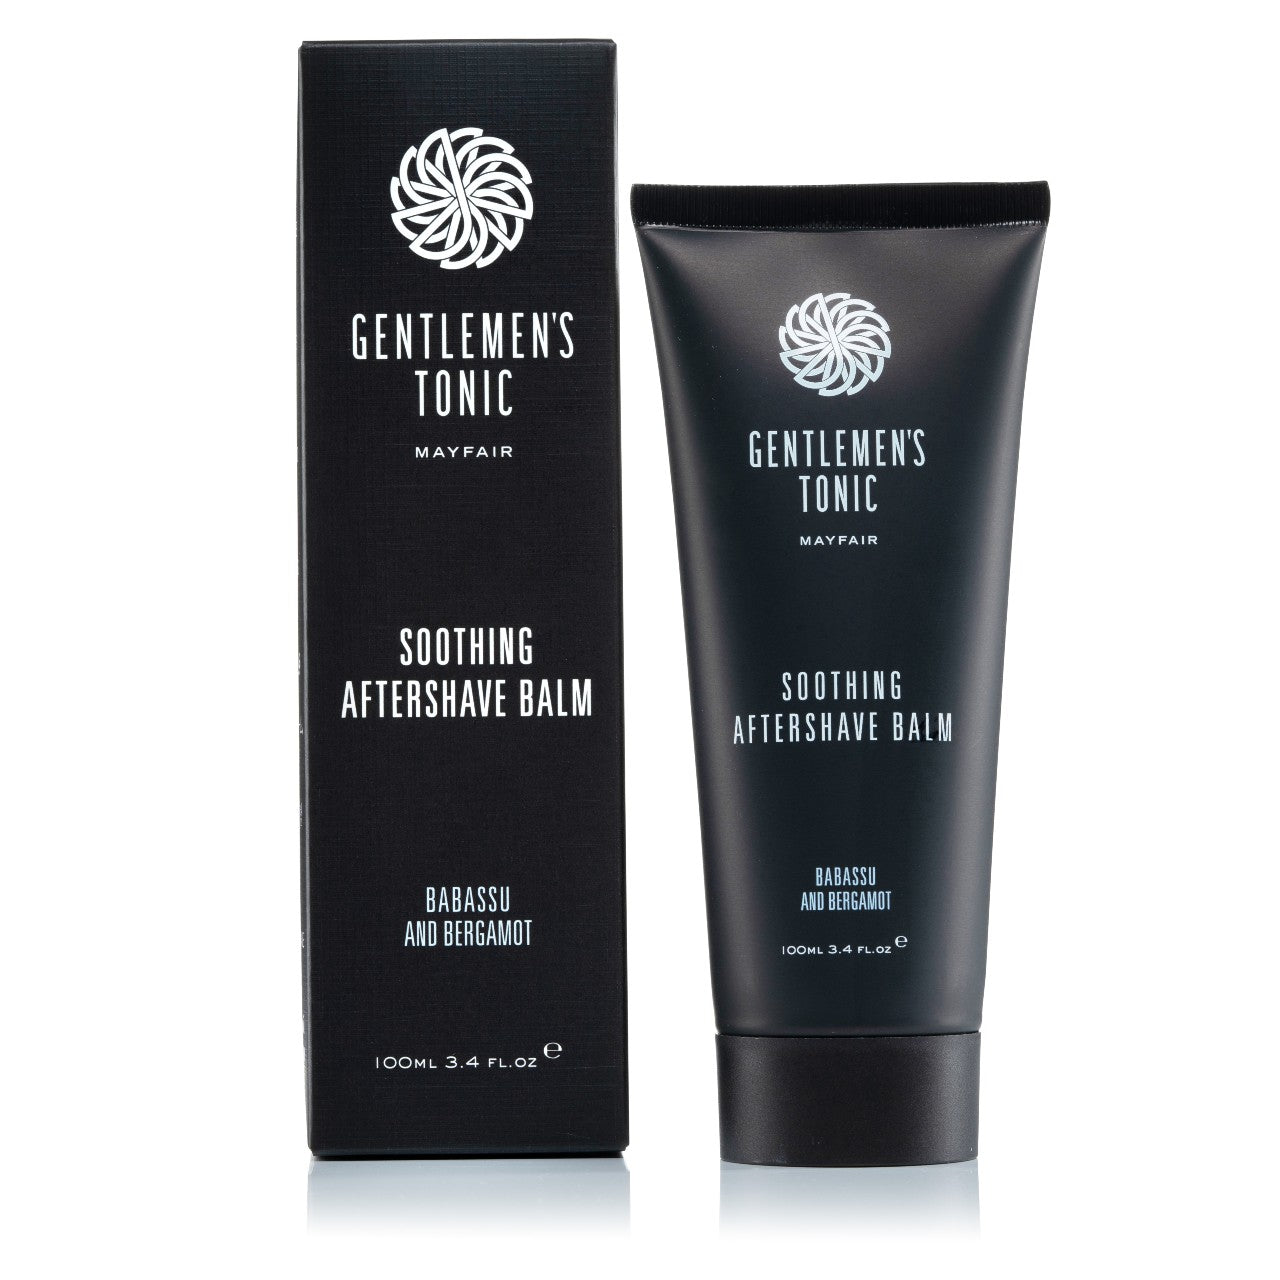 GENTLEMEN'S TONIC Soothing After Shave Balm